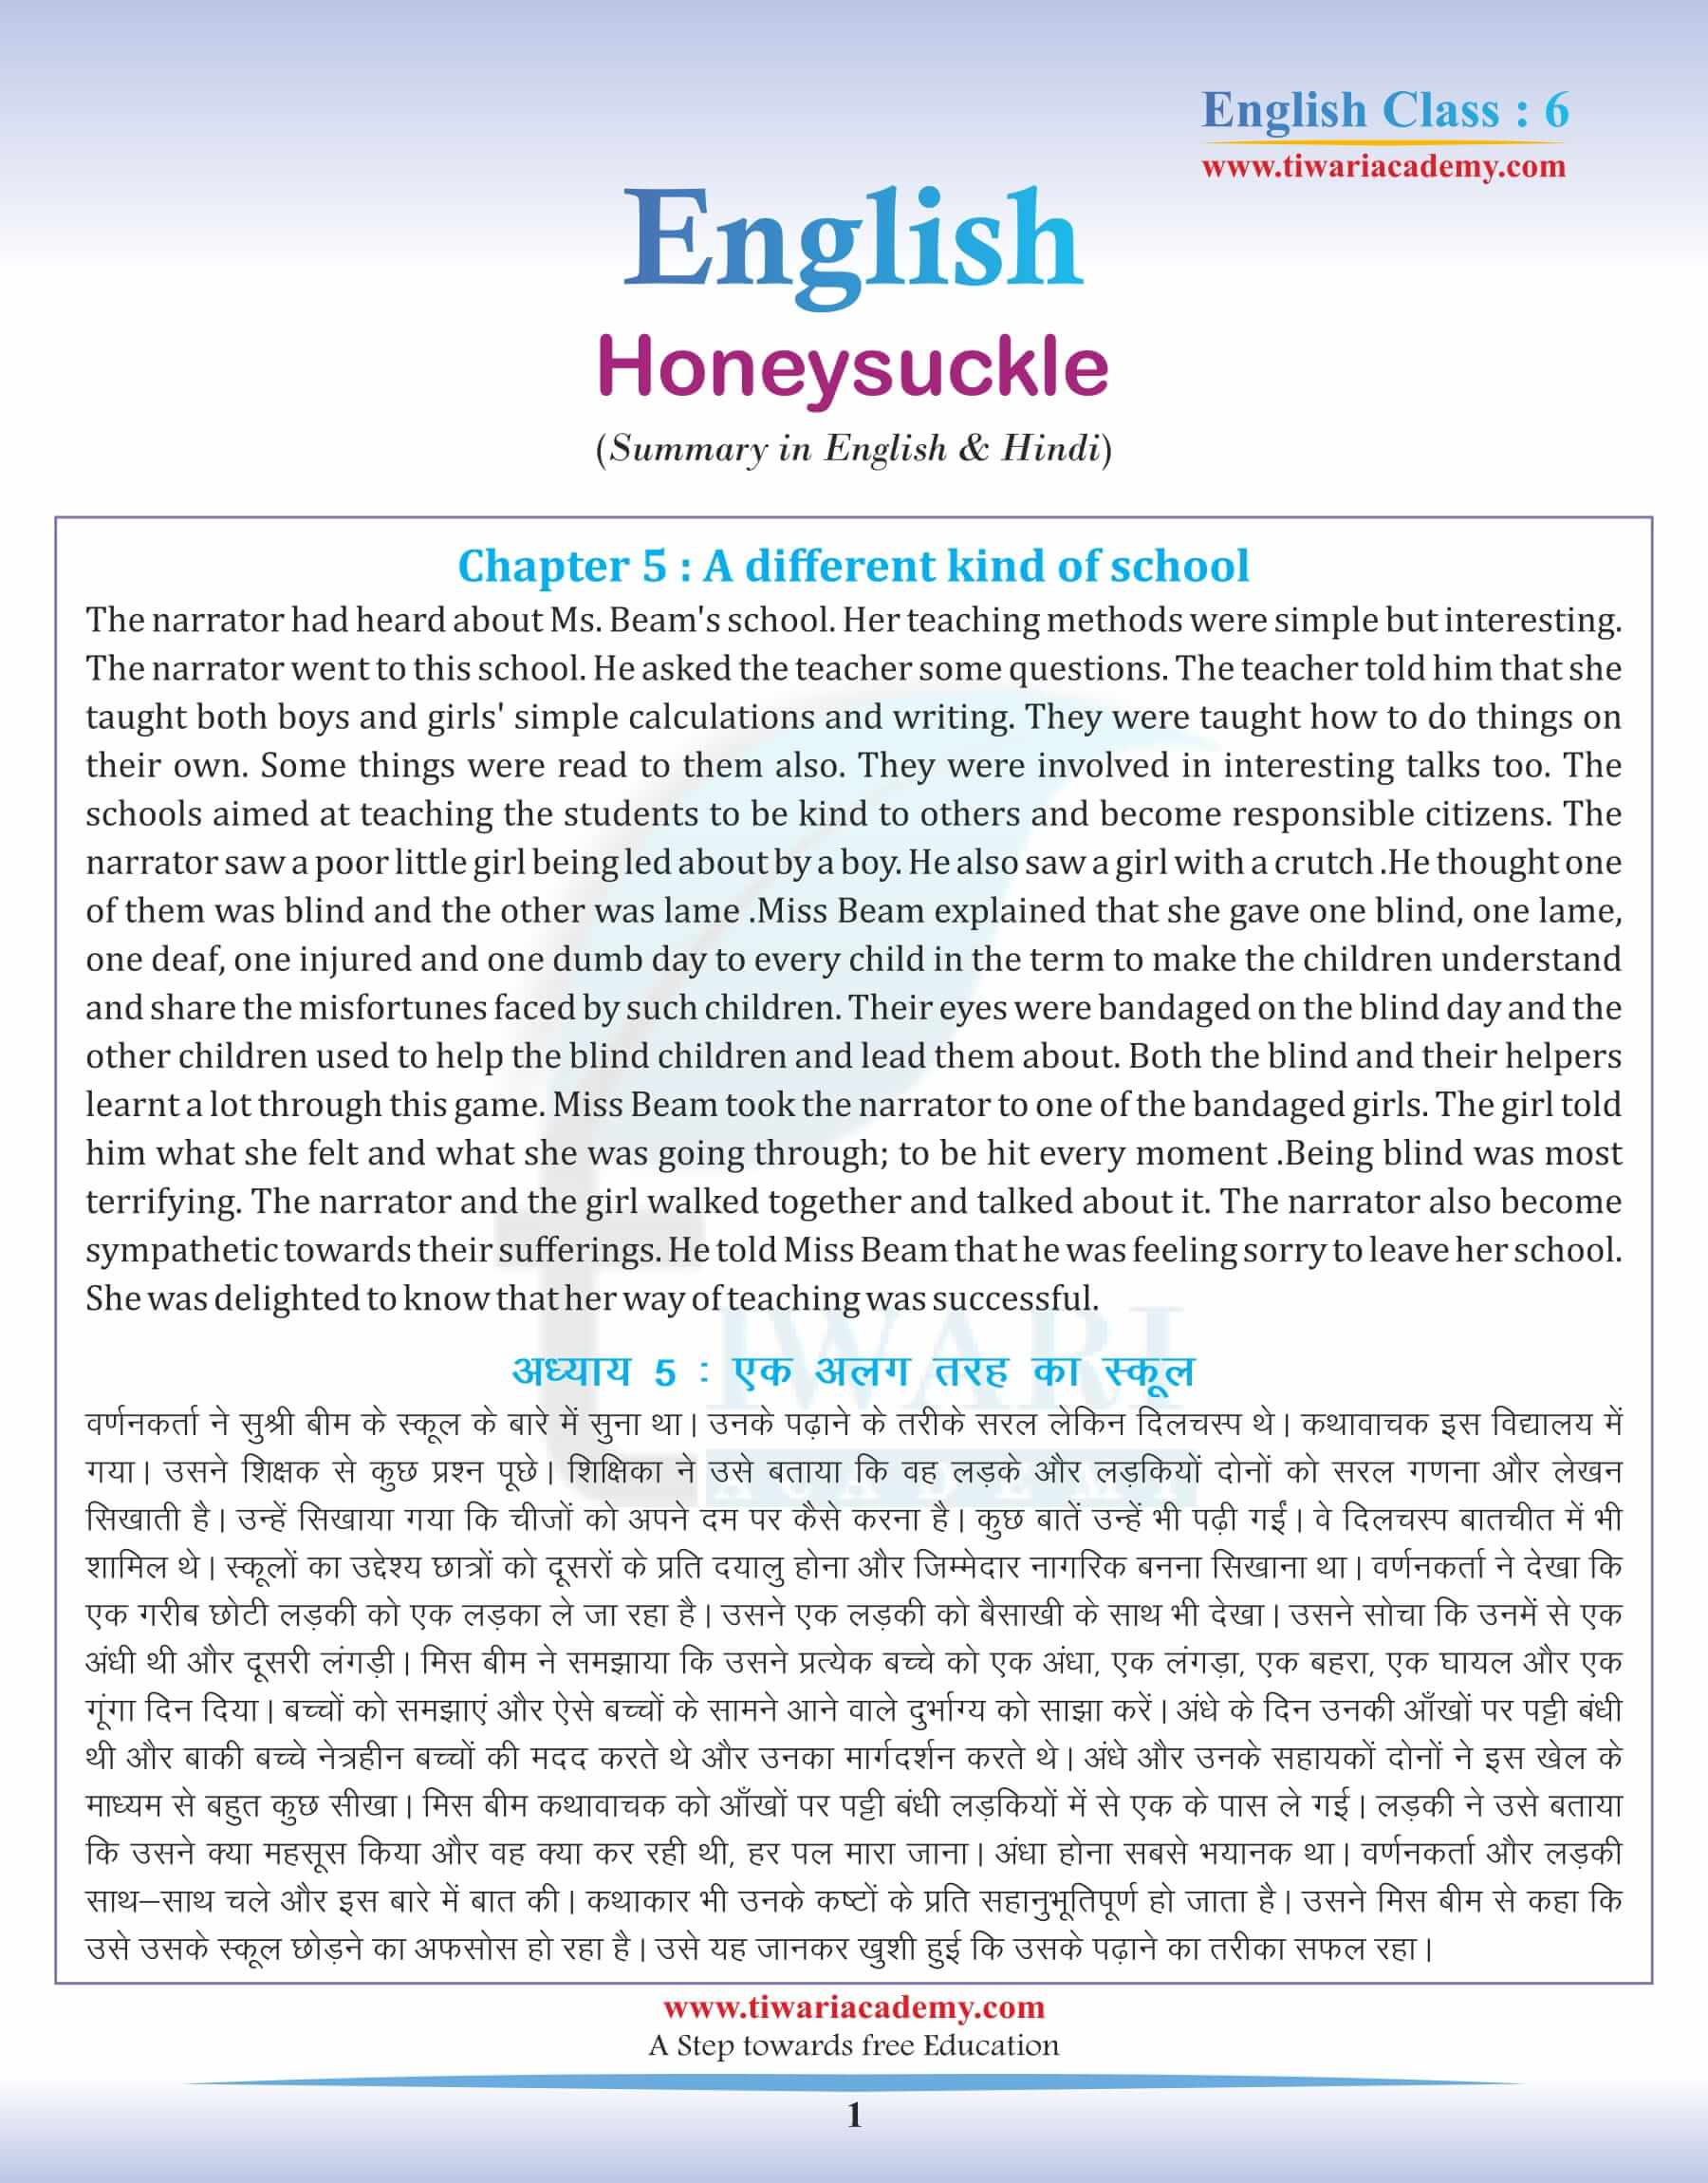 Class 6 English Chapter 5 Summary in Hindi and English